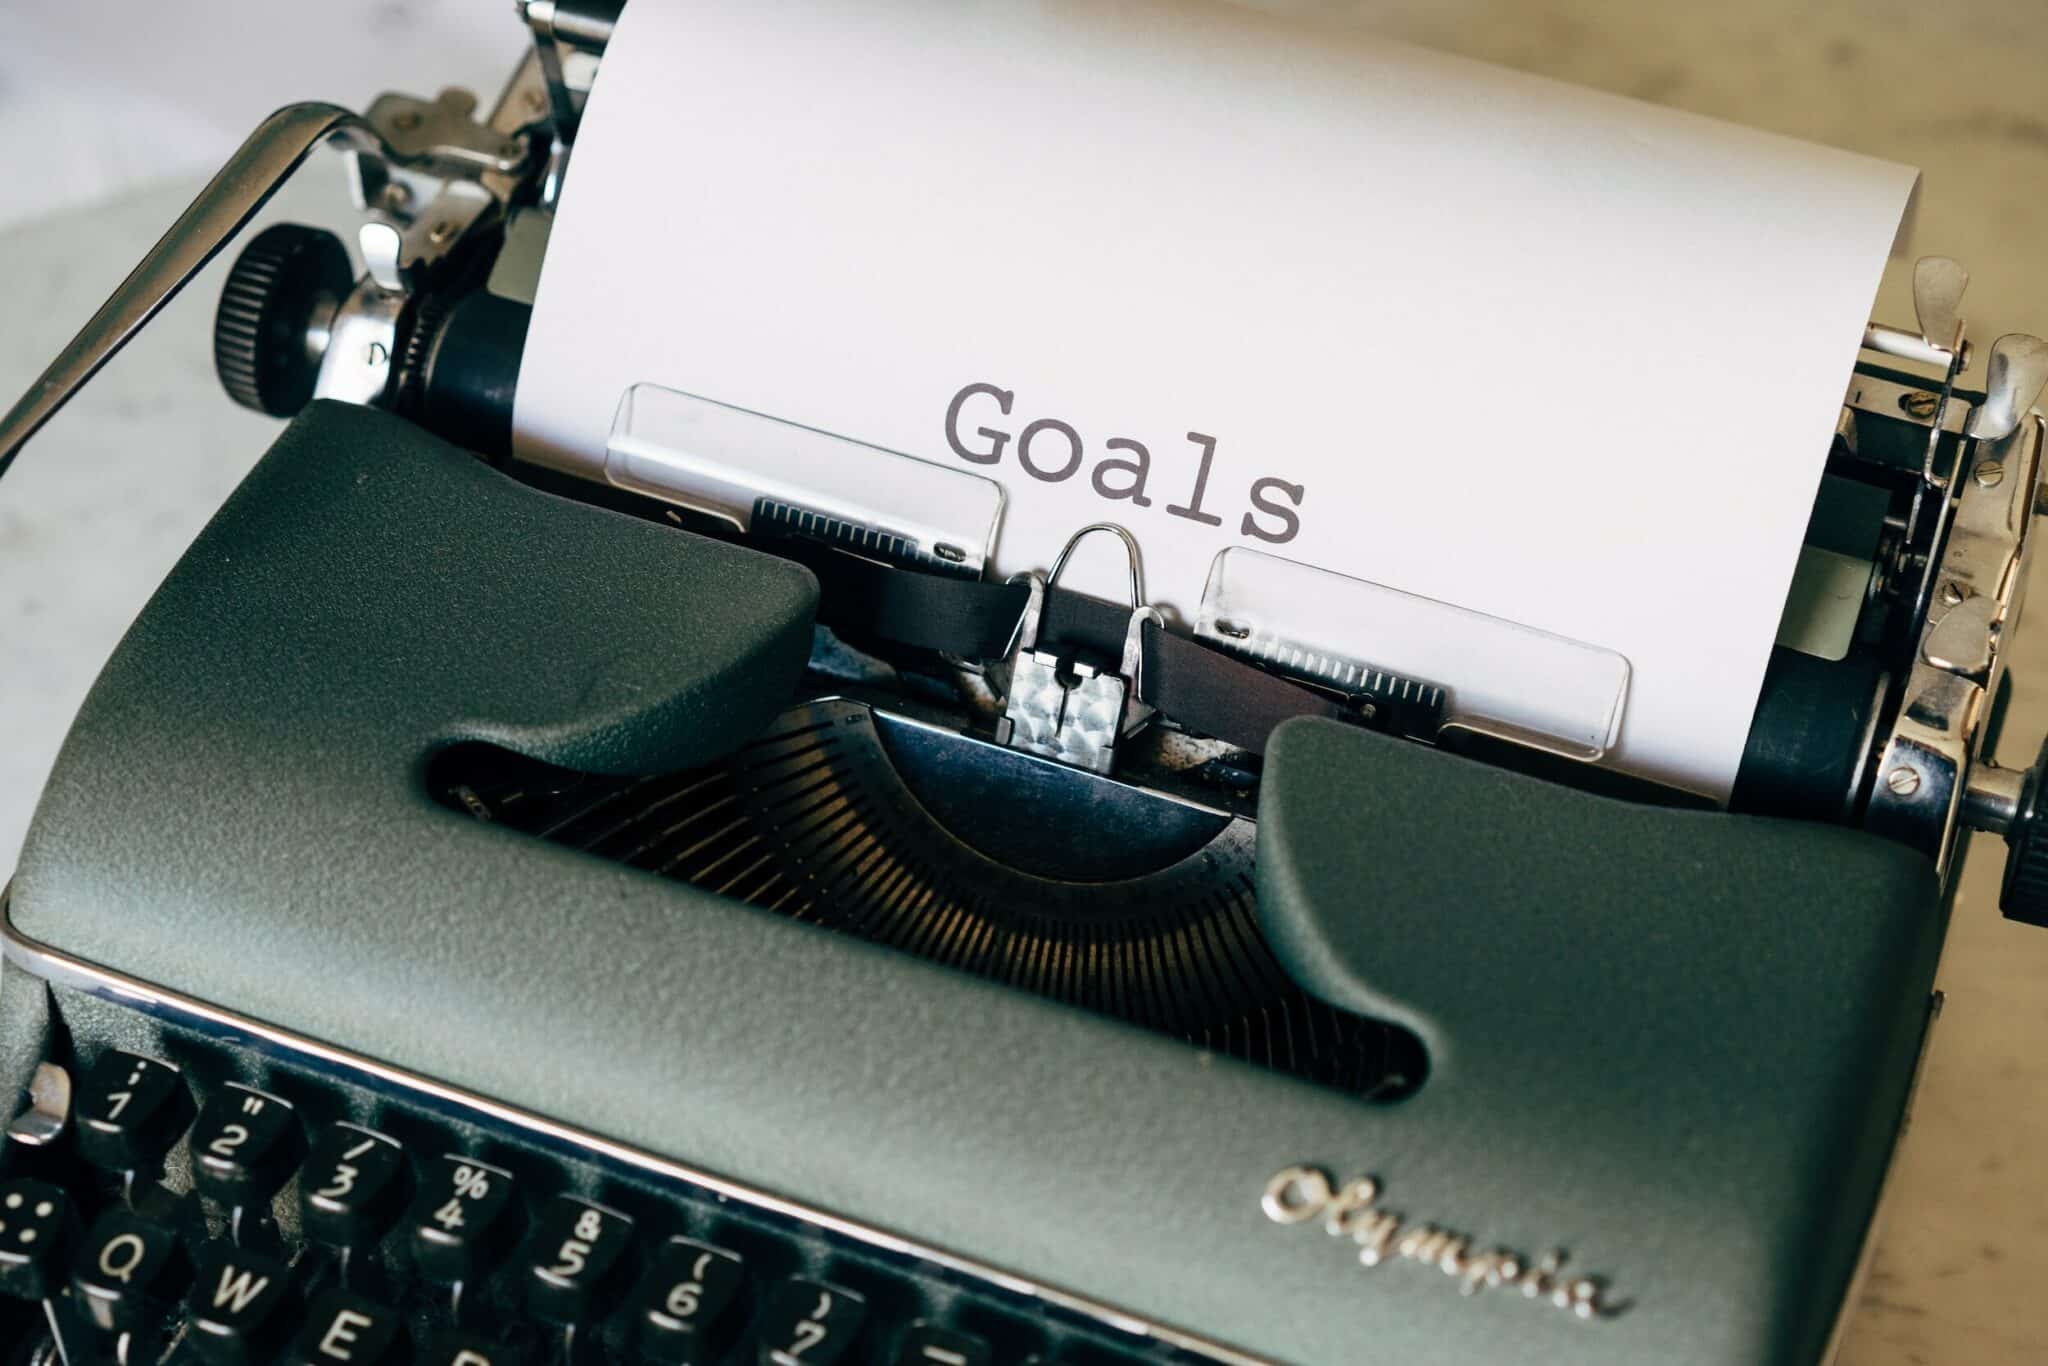 Typewriter with Goals as the title of the page